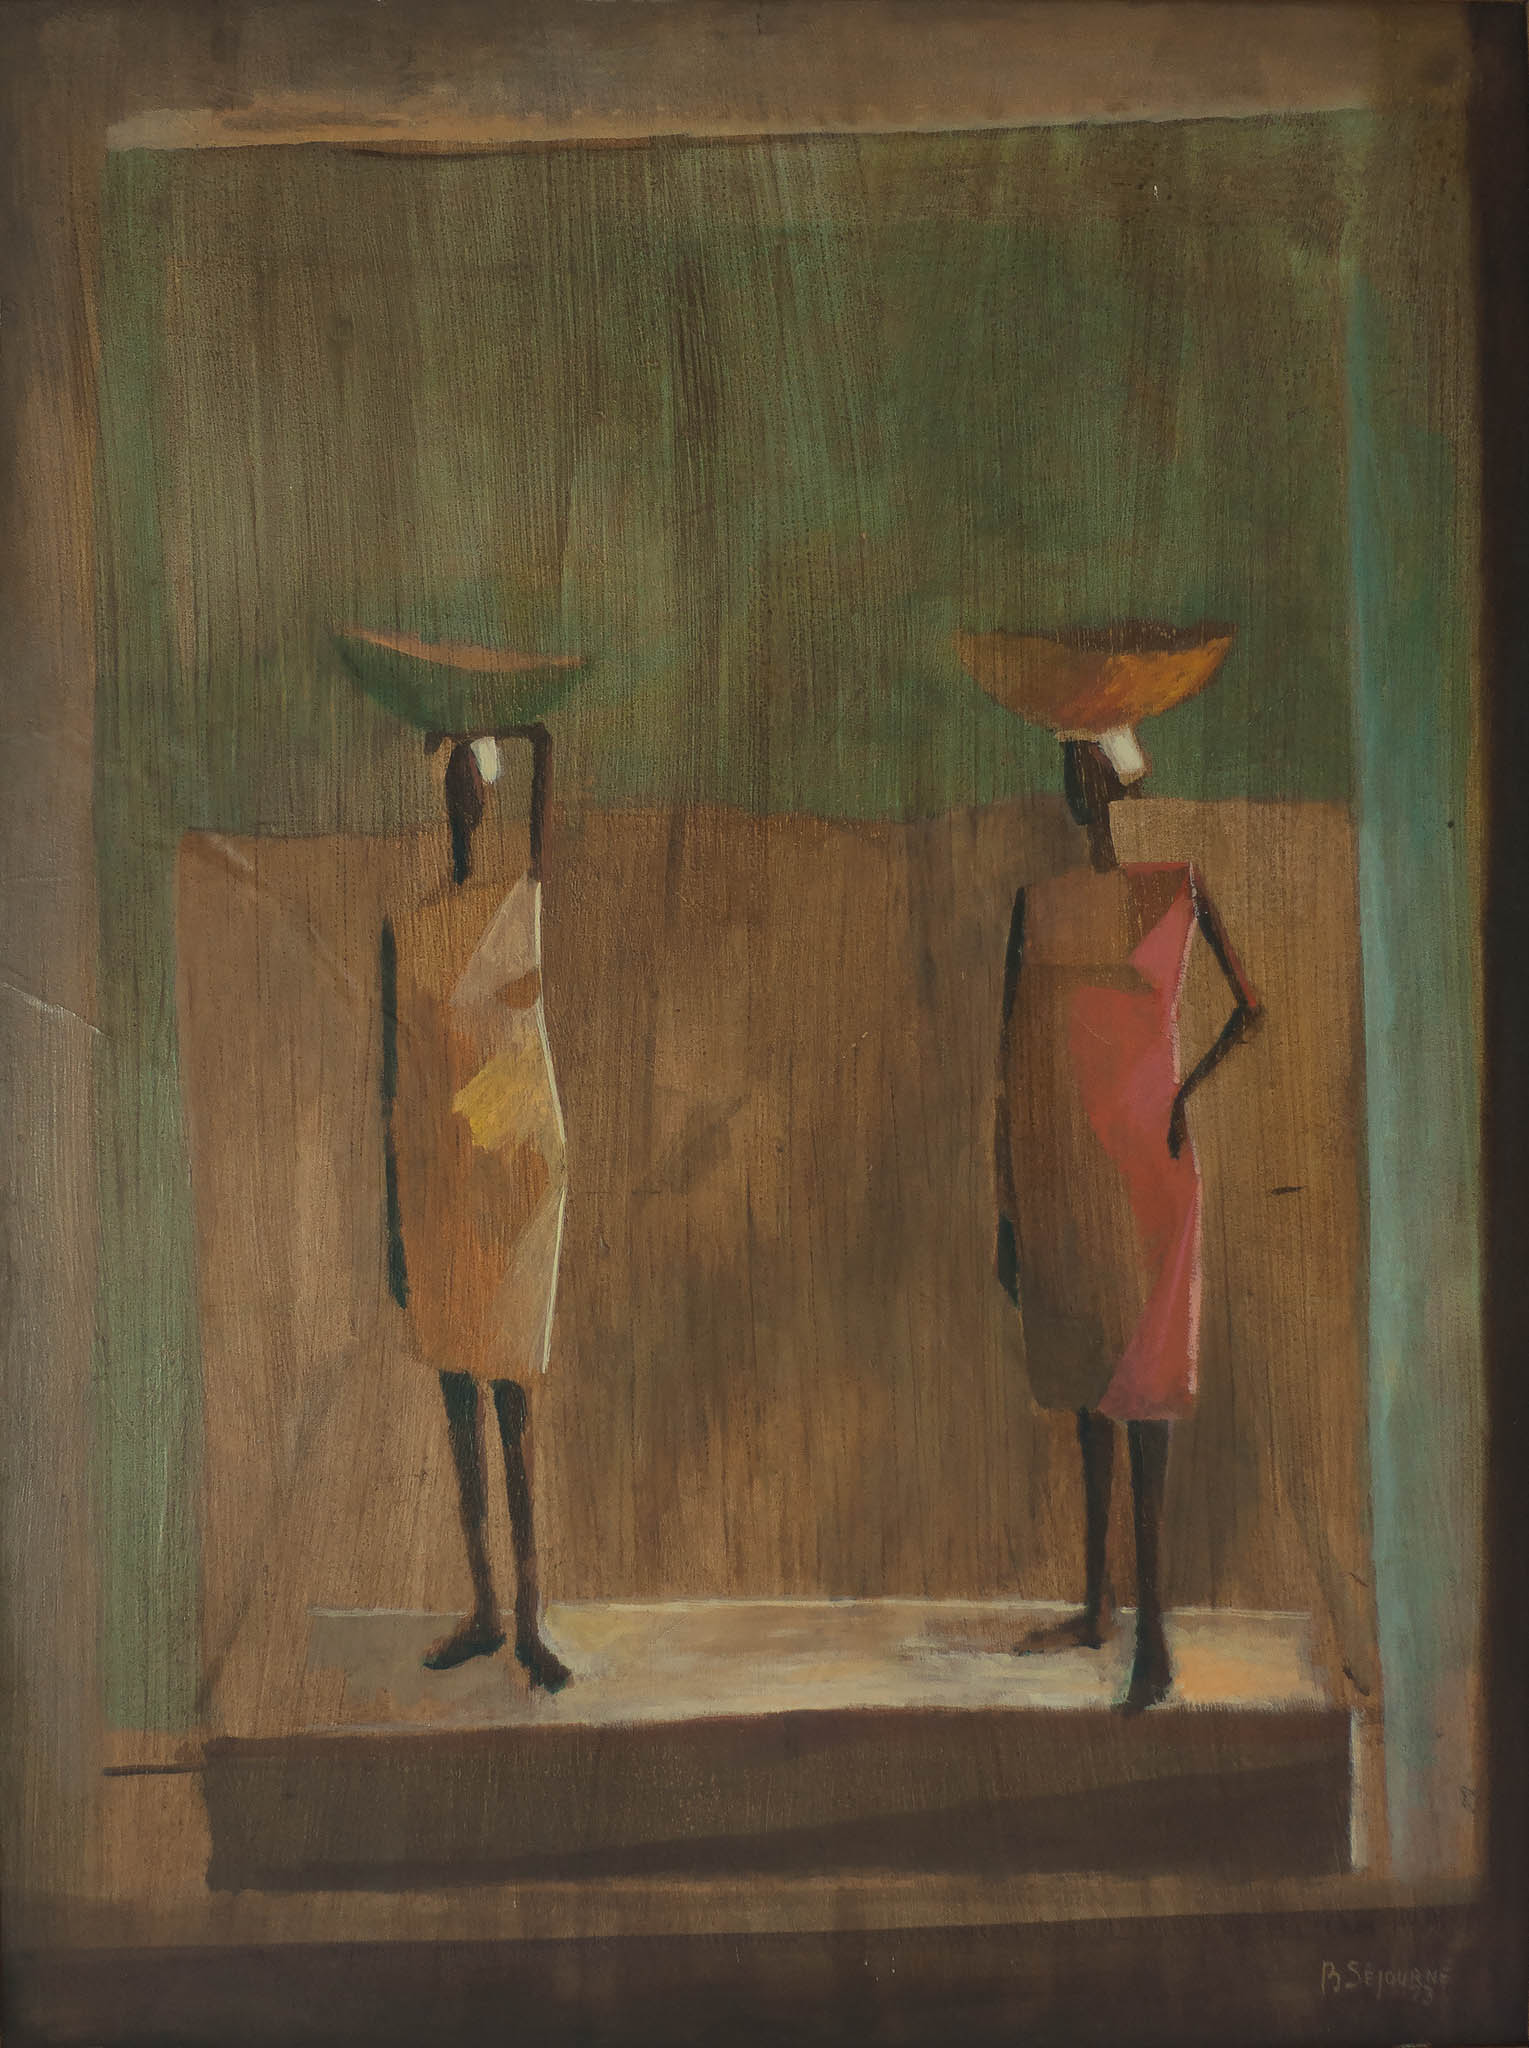 Two Women with Baskets on heads, 1973